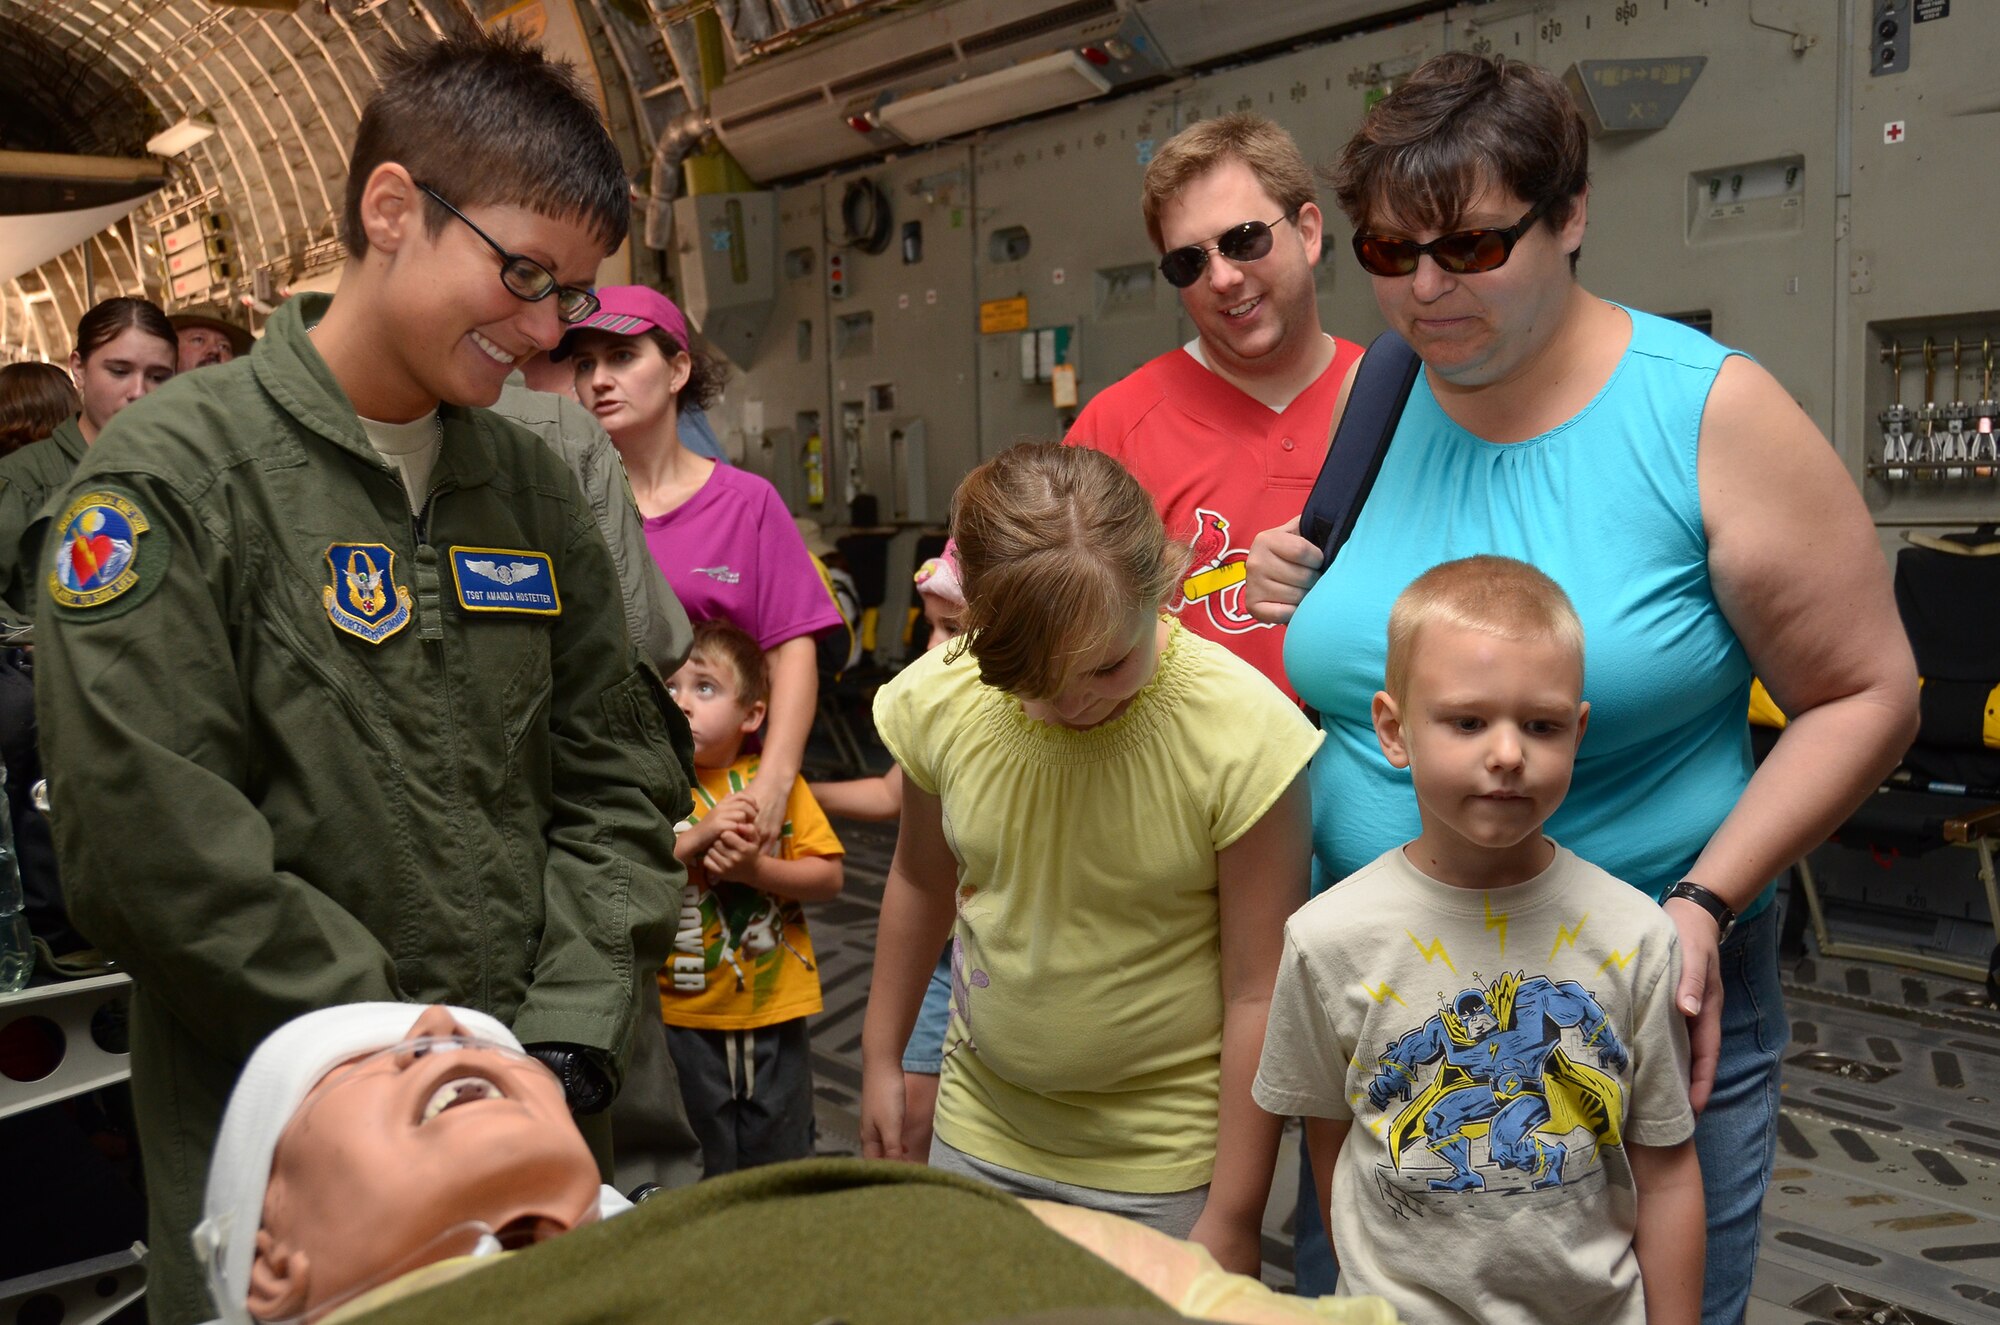 WRIGHT-PATTERSON AIR FORCE BASE, Ohio - Tech. Sgt. Amanda Hostetter, 445th Aeromedical Evacuation Squadron, interacts with visitors aboard a 445th Airlift Wing C-17 Globemaster III during the 2011 Air Show & Lifestyle Expo at Waterkloof Air Force Base, South Africa, Oct. 1. (U.S. Air Force photo/Senior Airman Mikhail Berlin)